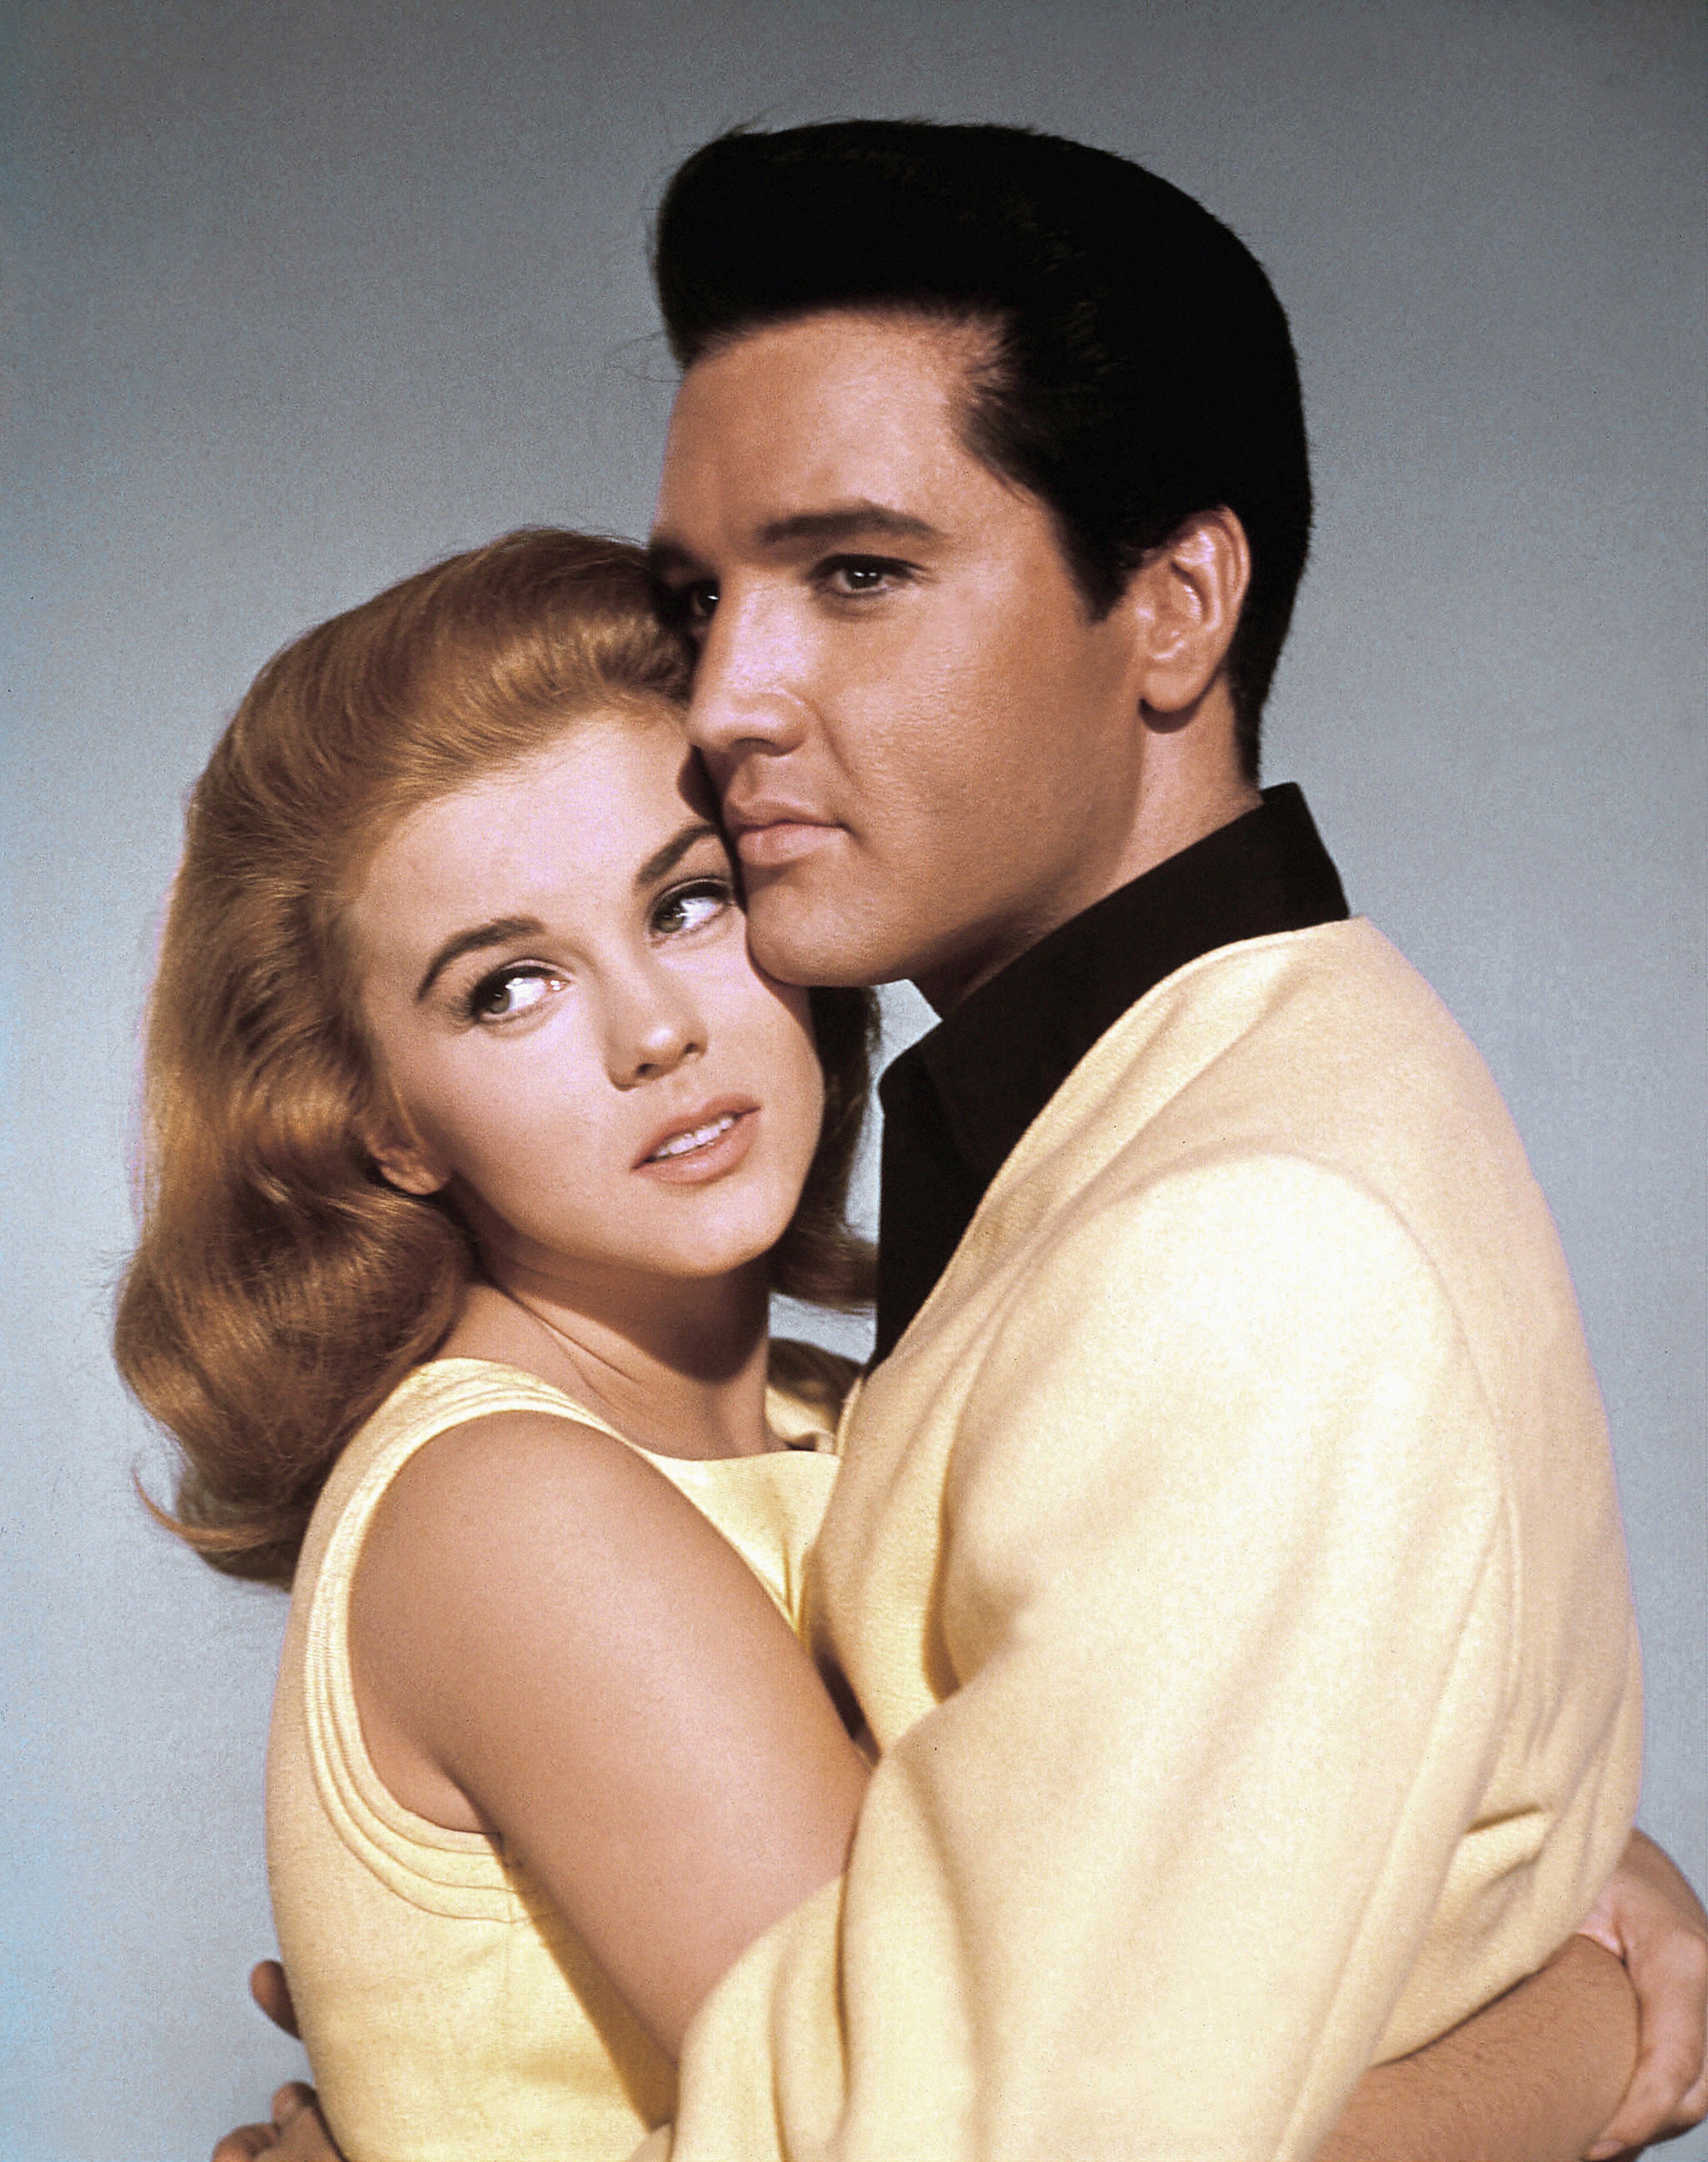 Swedish-American actress, singer and dancer Ann-Margret and American singer, actor and icon Elvis Presley promoting the movie Viva Las Vegas, directed and produced by George Sidney. | Source: Getty Images